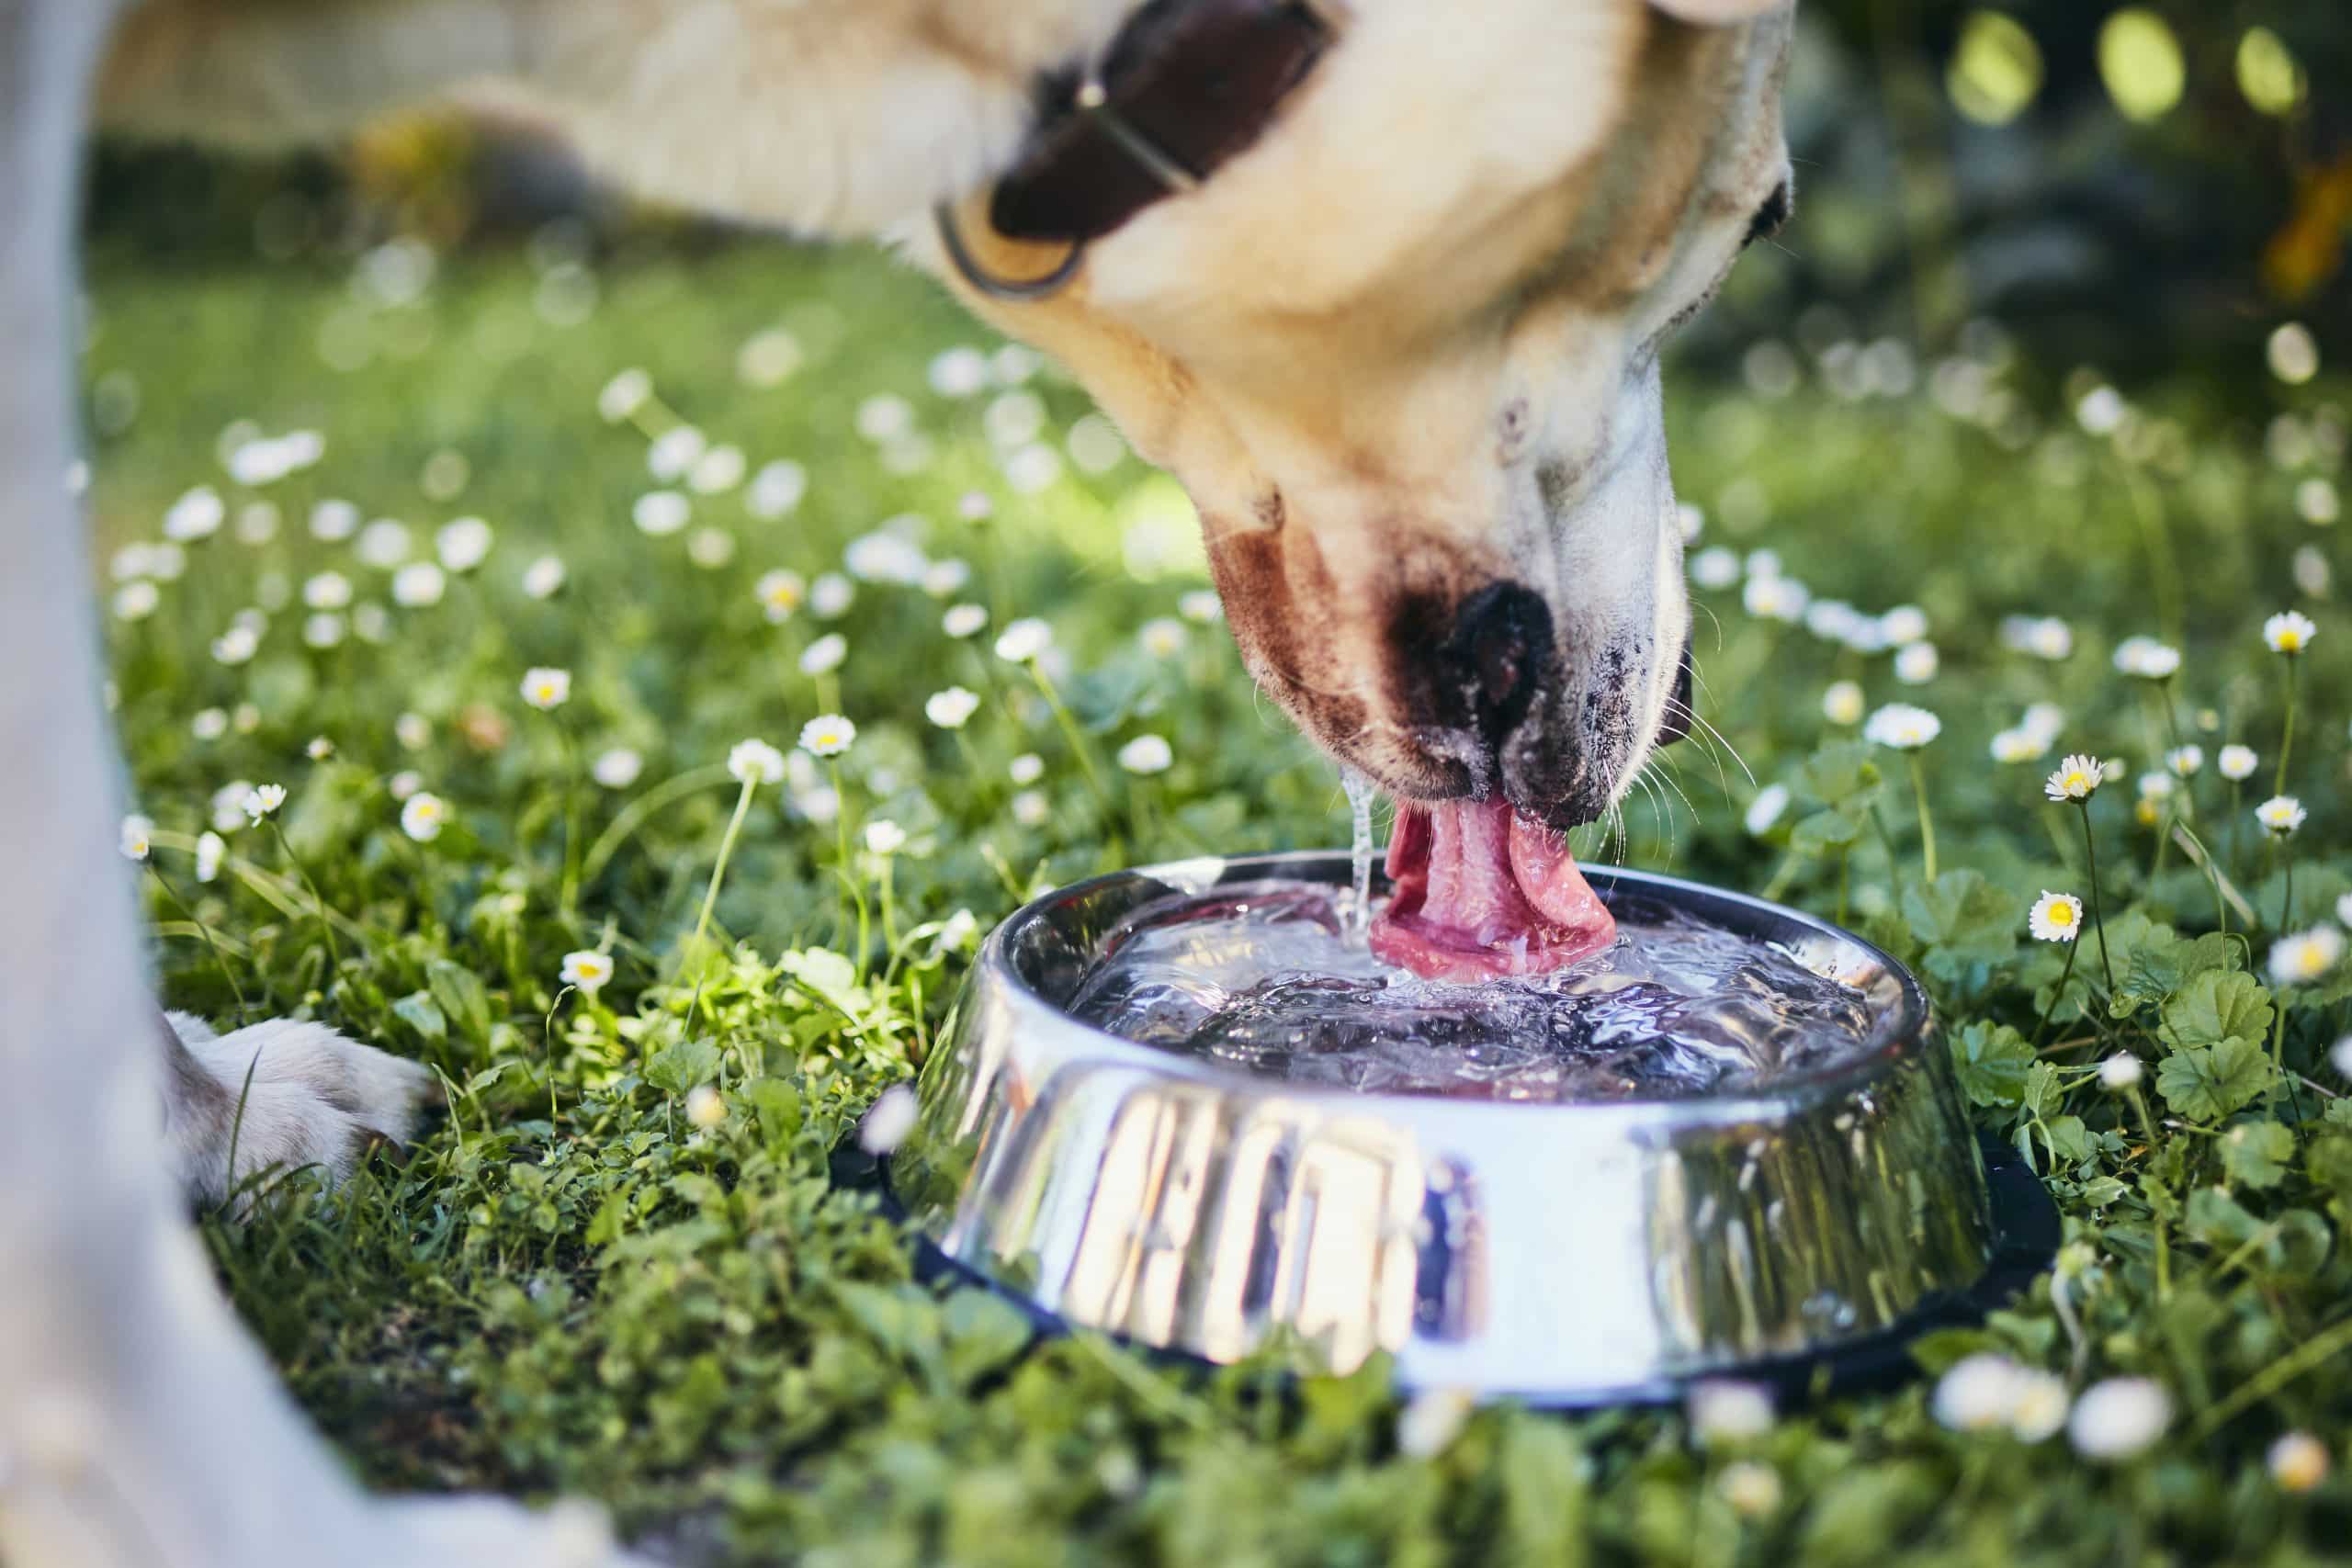 https://fluentwoof.com/wp-content/uploads/2021/11/dog-drinking-water-from-bowl-2021-08-26-22-38-54-utc-scaled.jpg